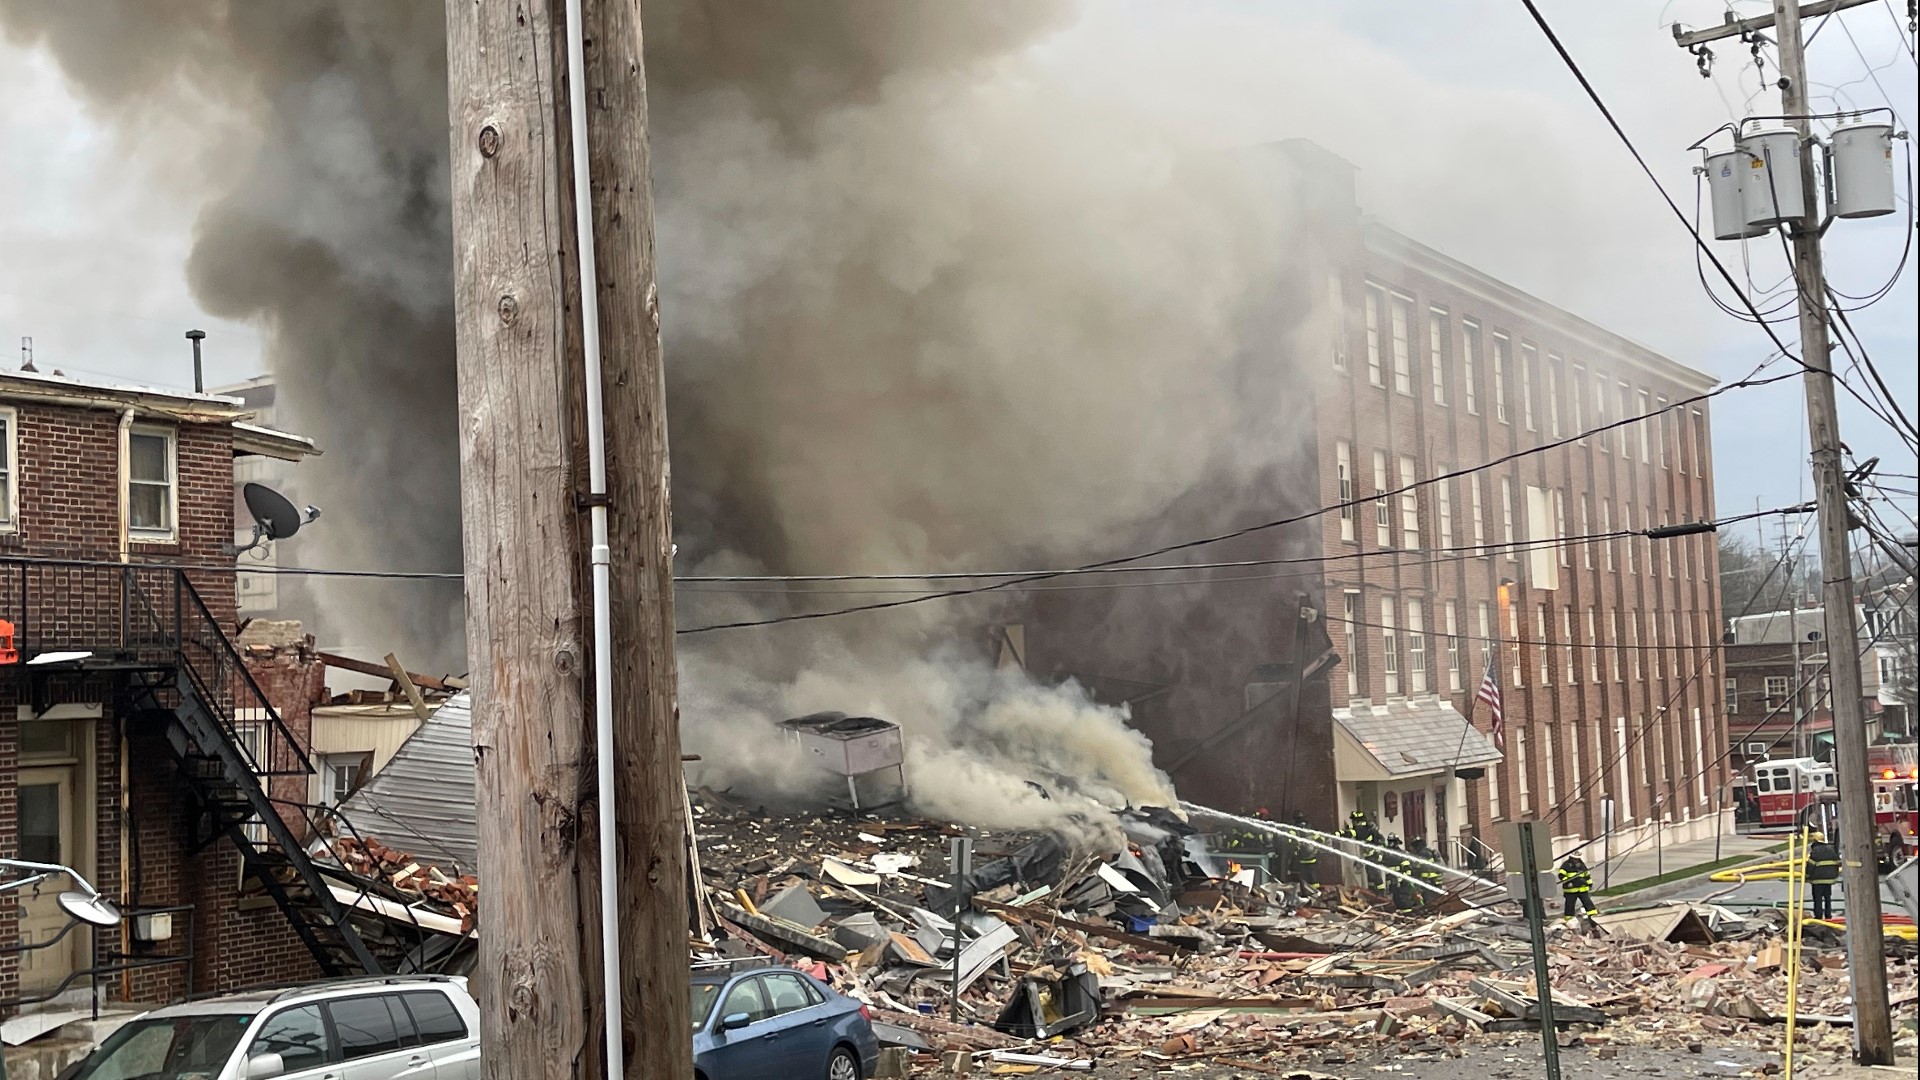 The bodies of Amy S. Sandoe, 49, of Ephrata, Lancaster County, and Domingo Cruz, 60, of Reading, were recovered from the rubble of the RM Palmer factory on Sunday.